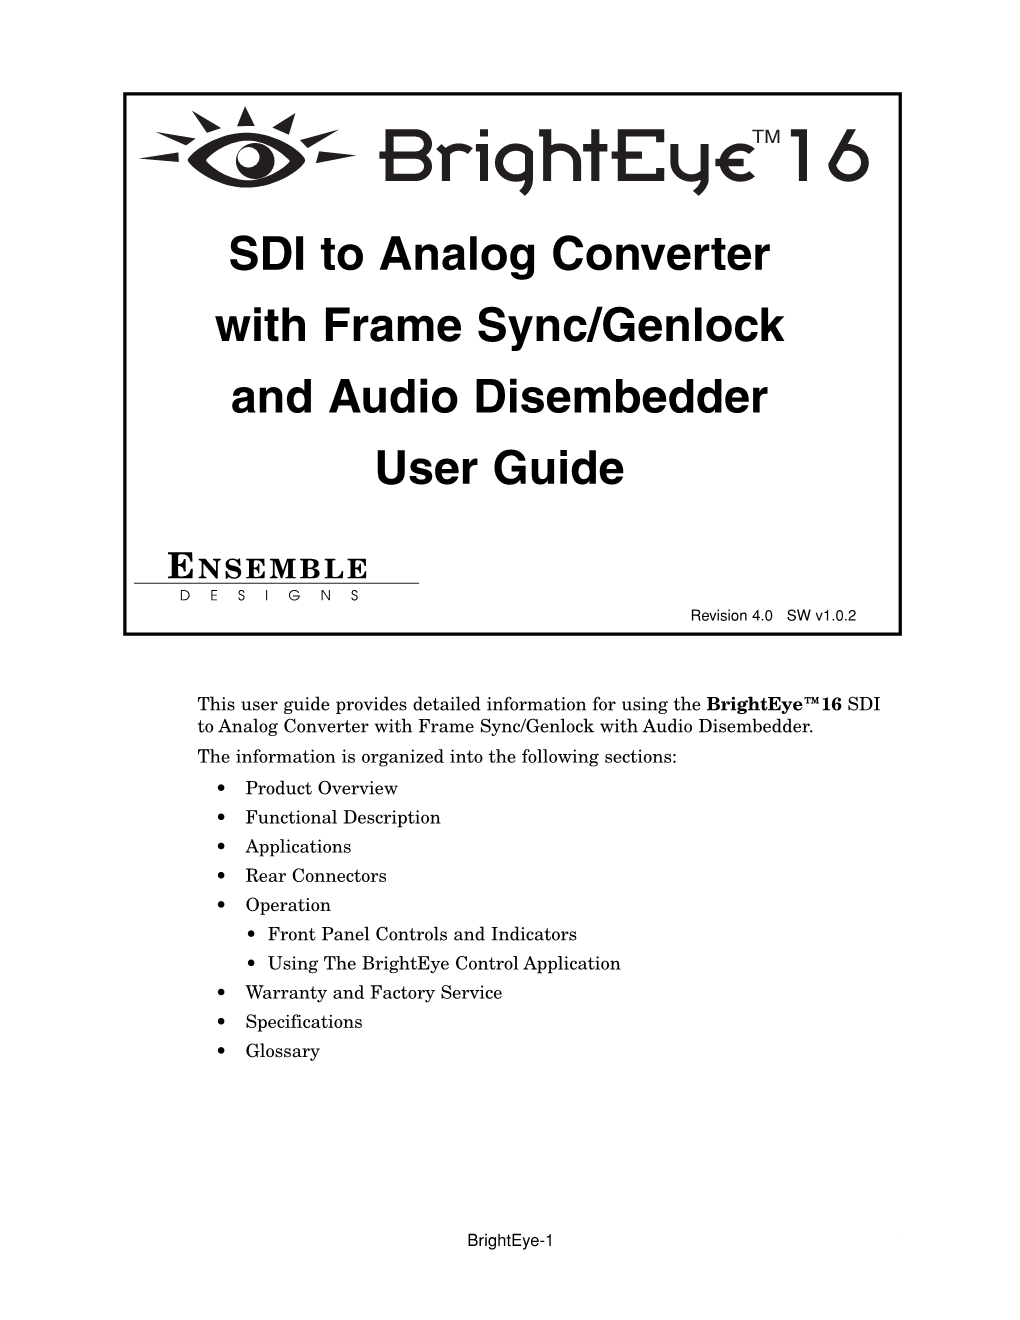 SDI to Analog Converter with Frame Sync/Genlock and Audio Disembedder User Guide